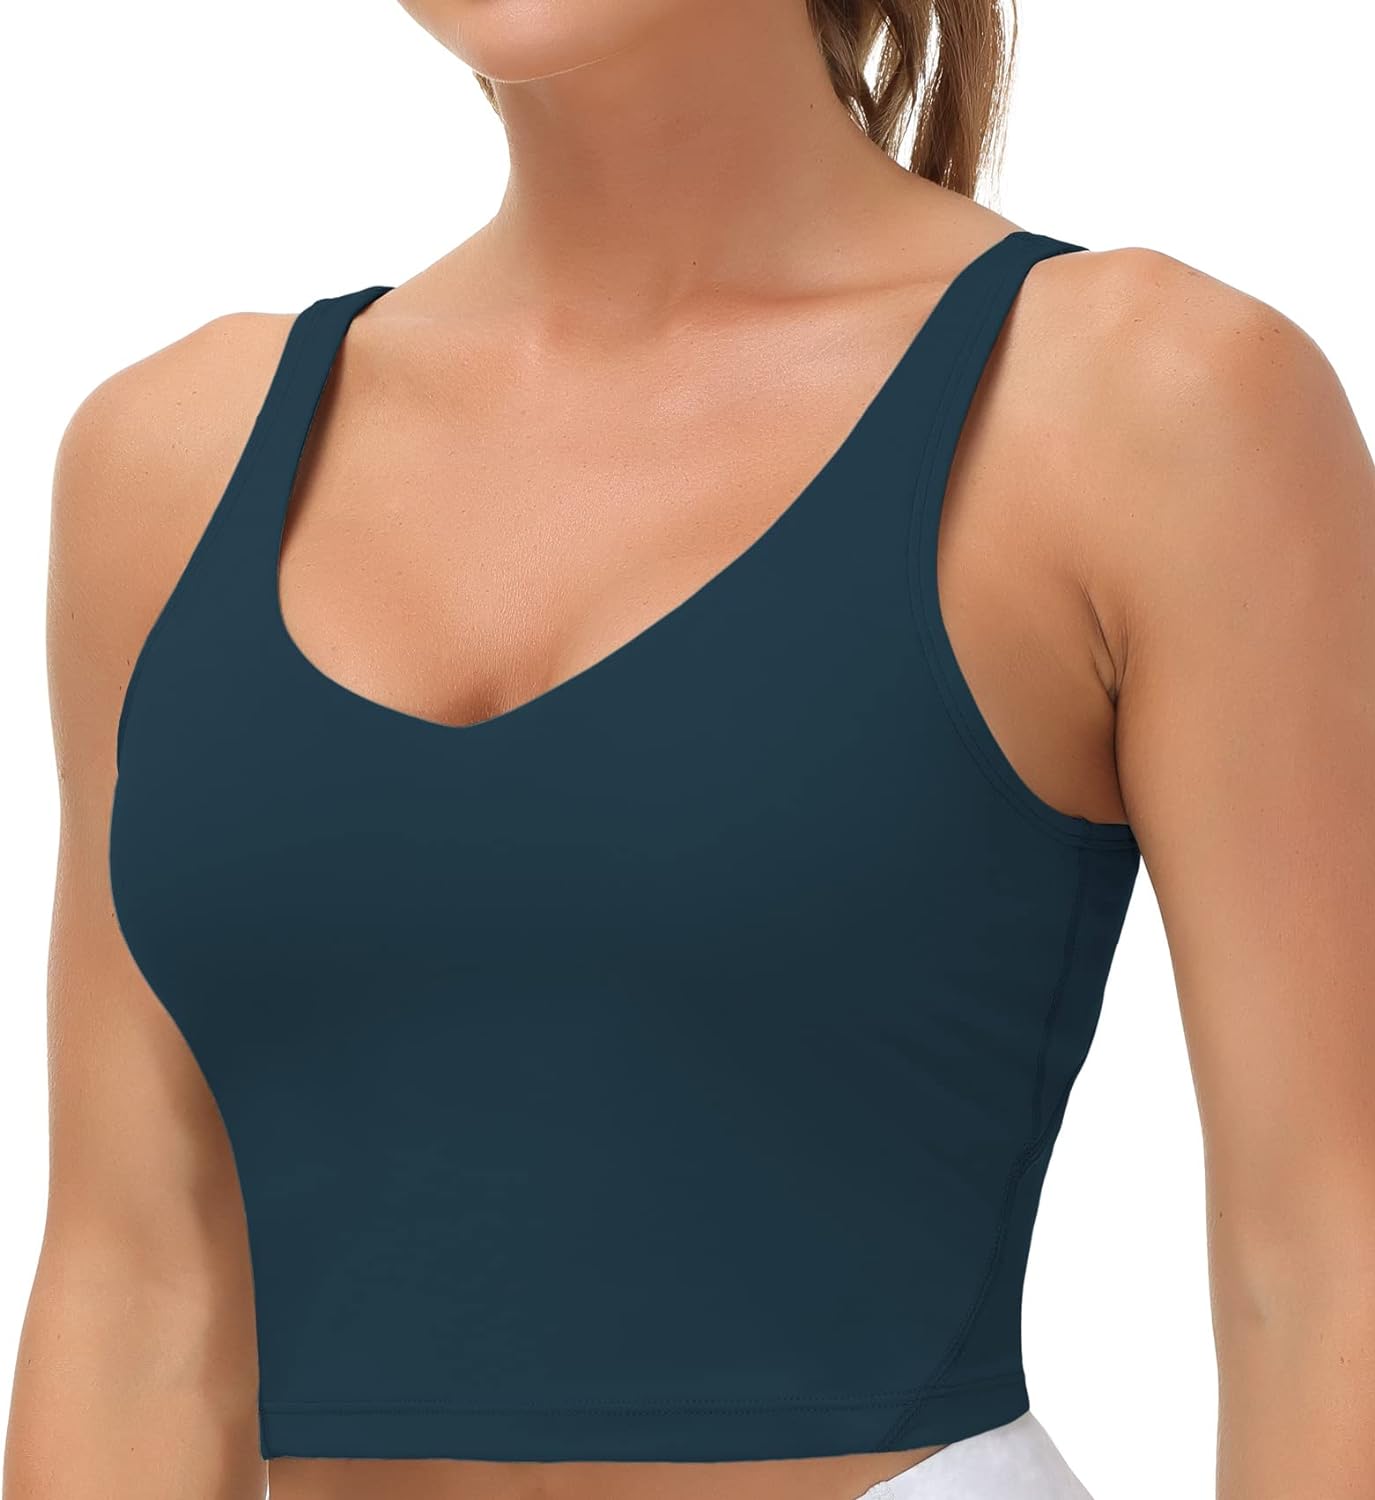 THE GYM PEOPLE Womens' Sports Bra Longline Wirefree Padded with